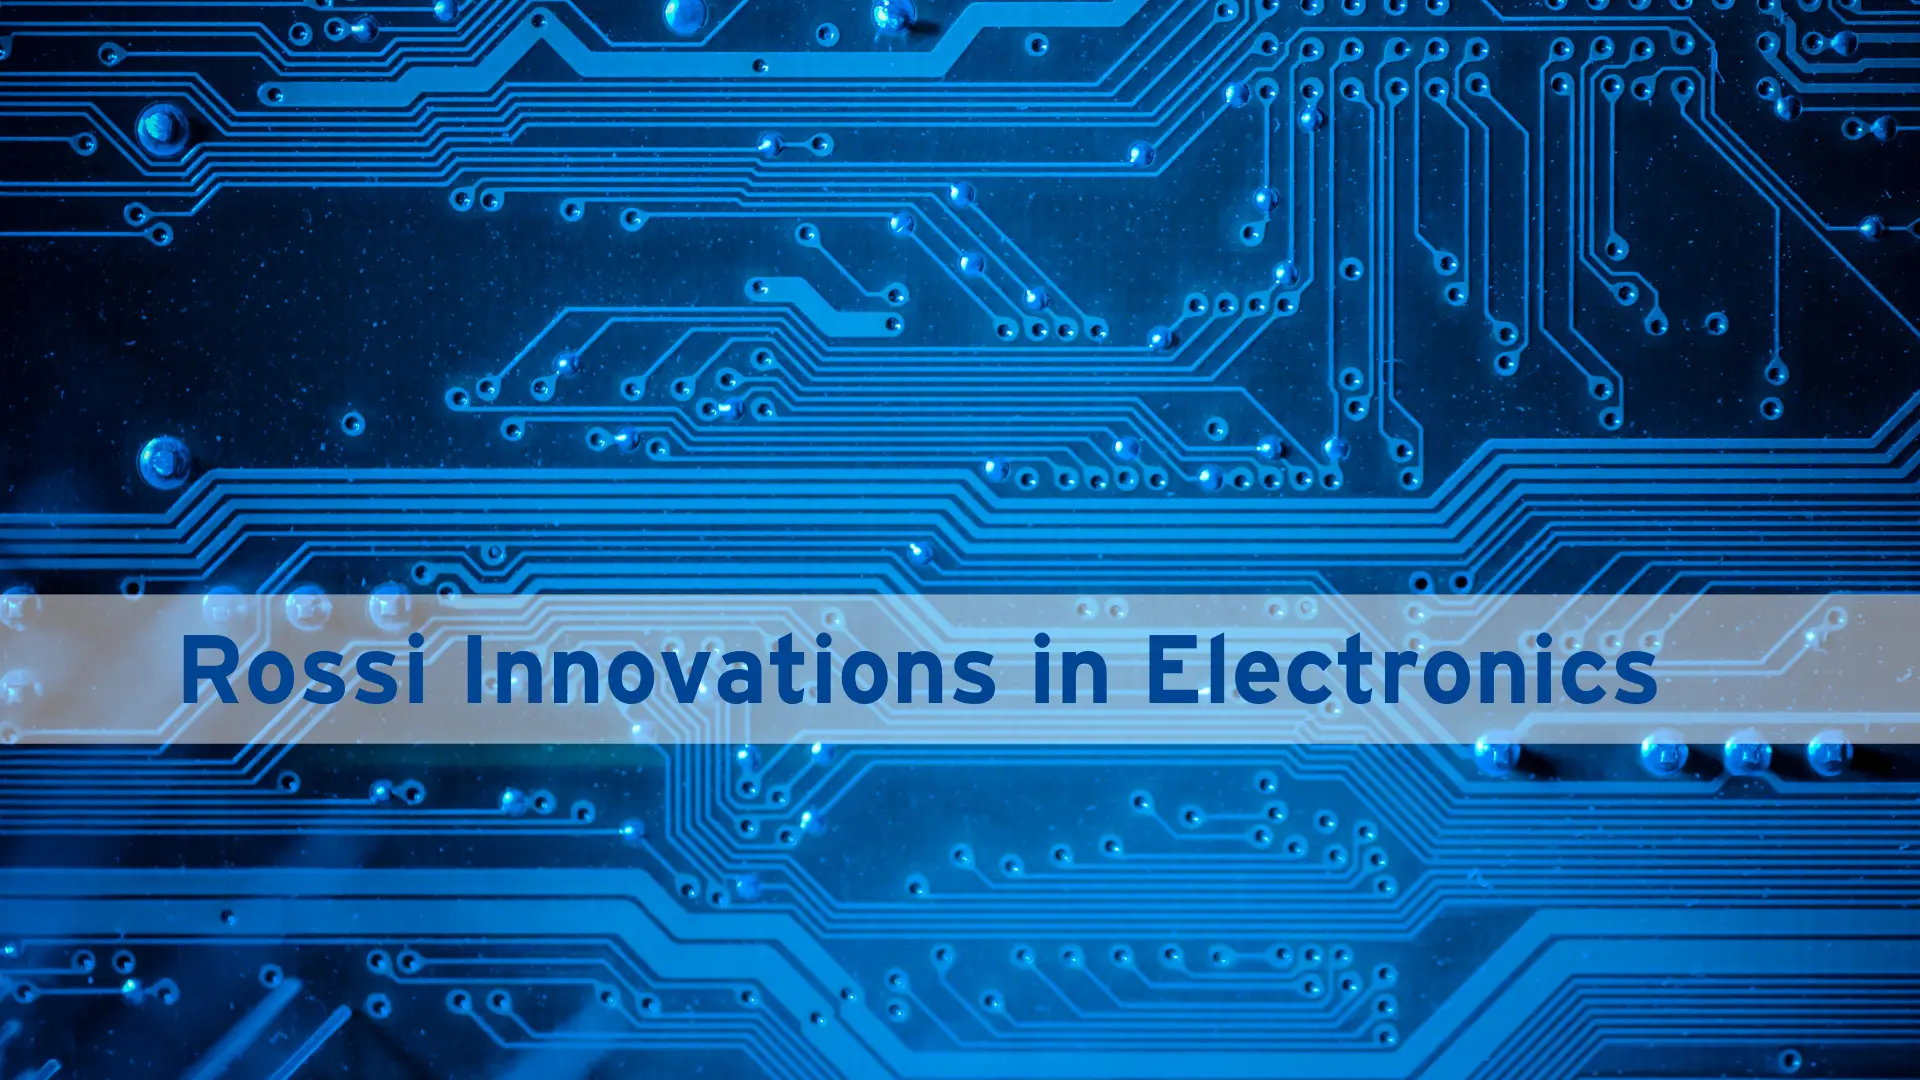 Rossi-innovations-in-electronics